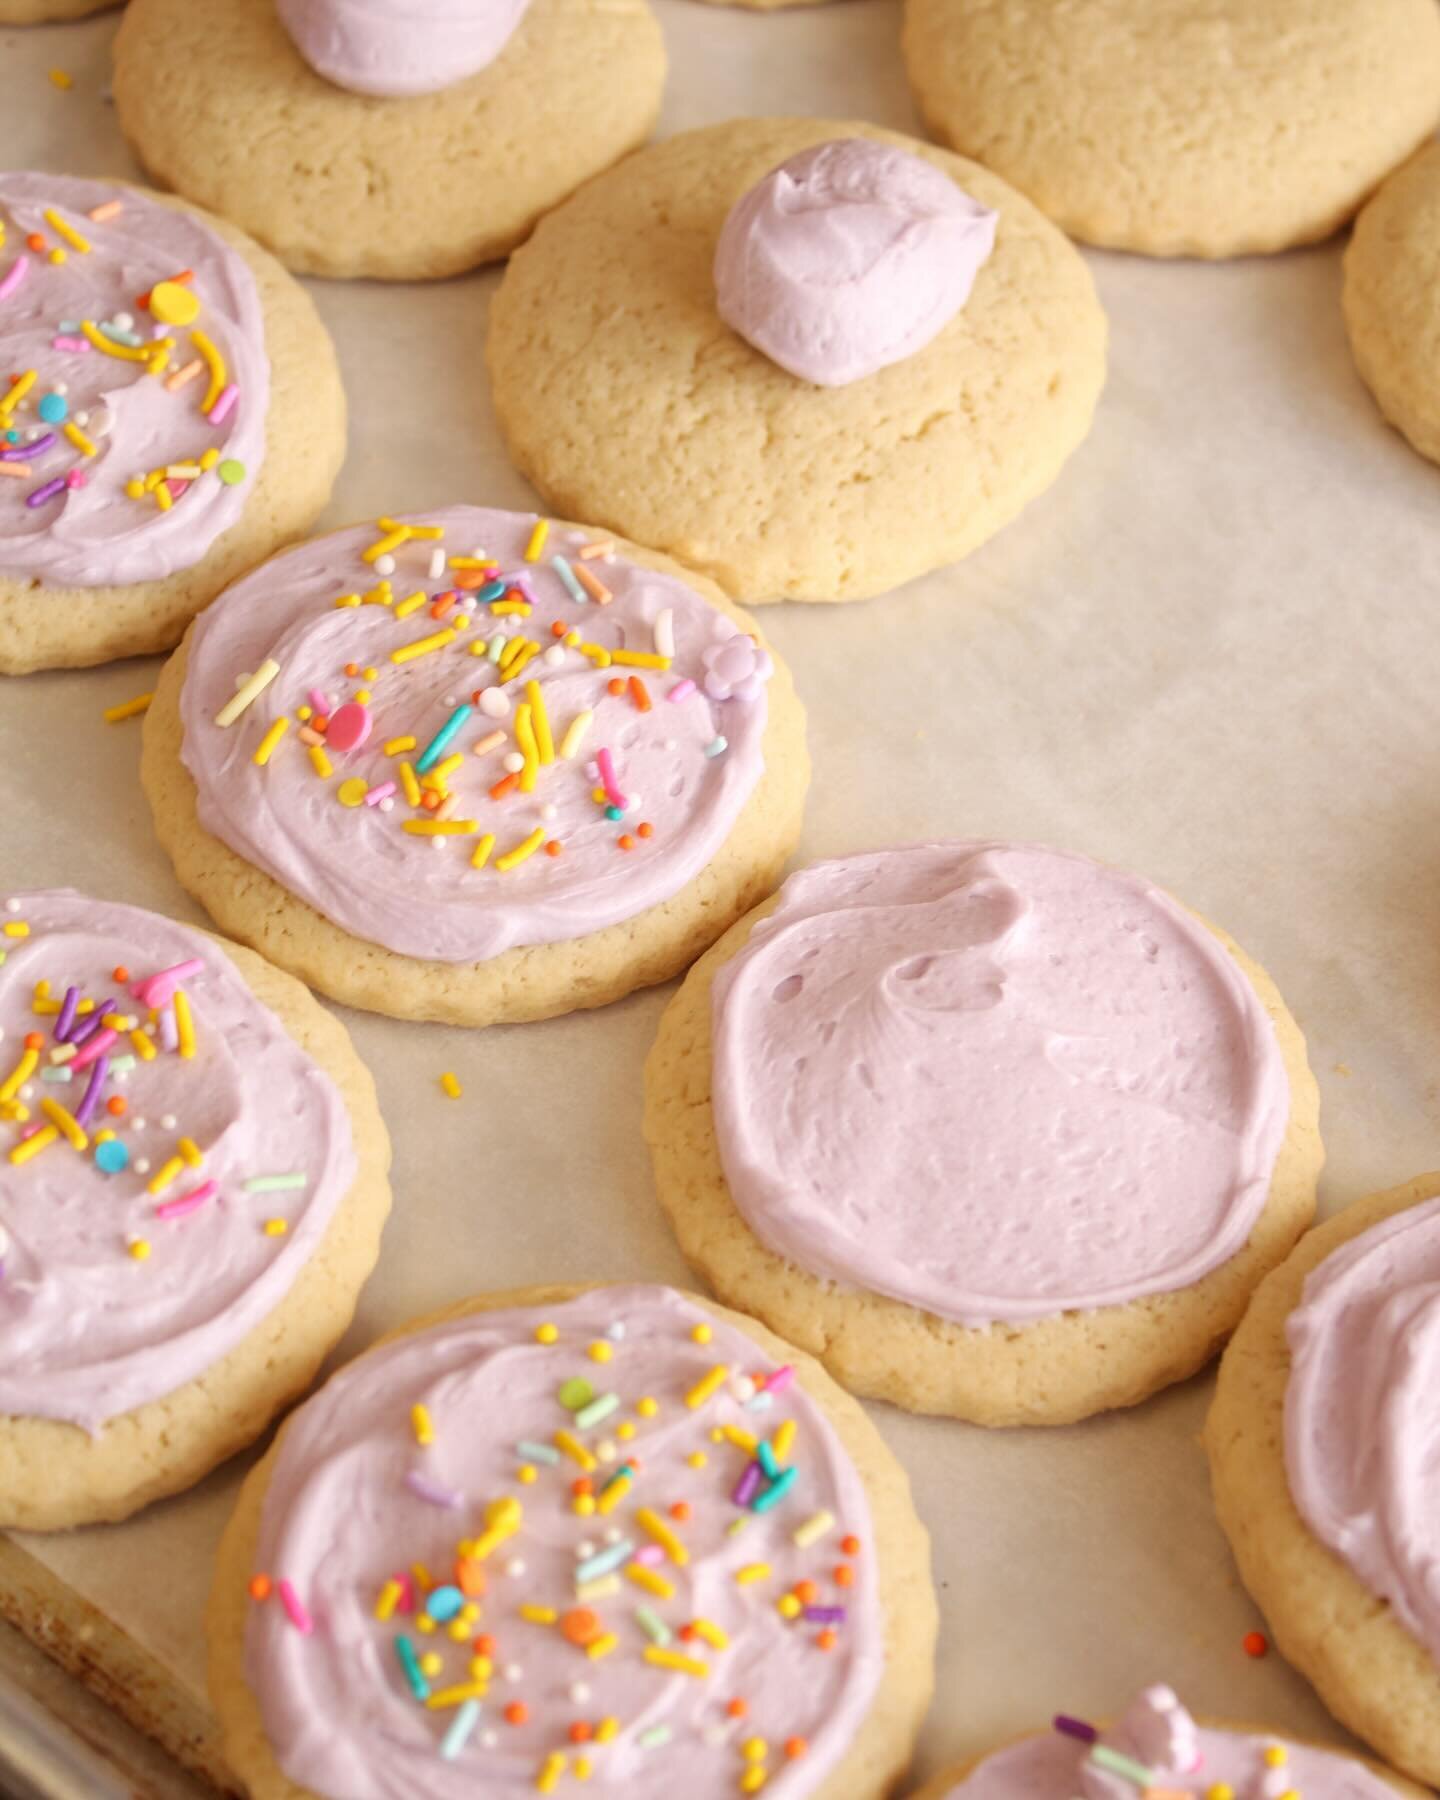 Soft &amp; cakey sugar cookies topped with colorful frosting &amp; sprinks 😋💜 That only dessert you need to make this weekend a sweet one!

#softbatchcookies #cookie #cookiedecorating #bakery #bakerylife #nashville #nashvillebakery #nashvilletn #na